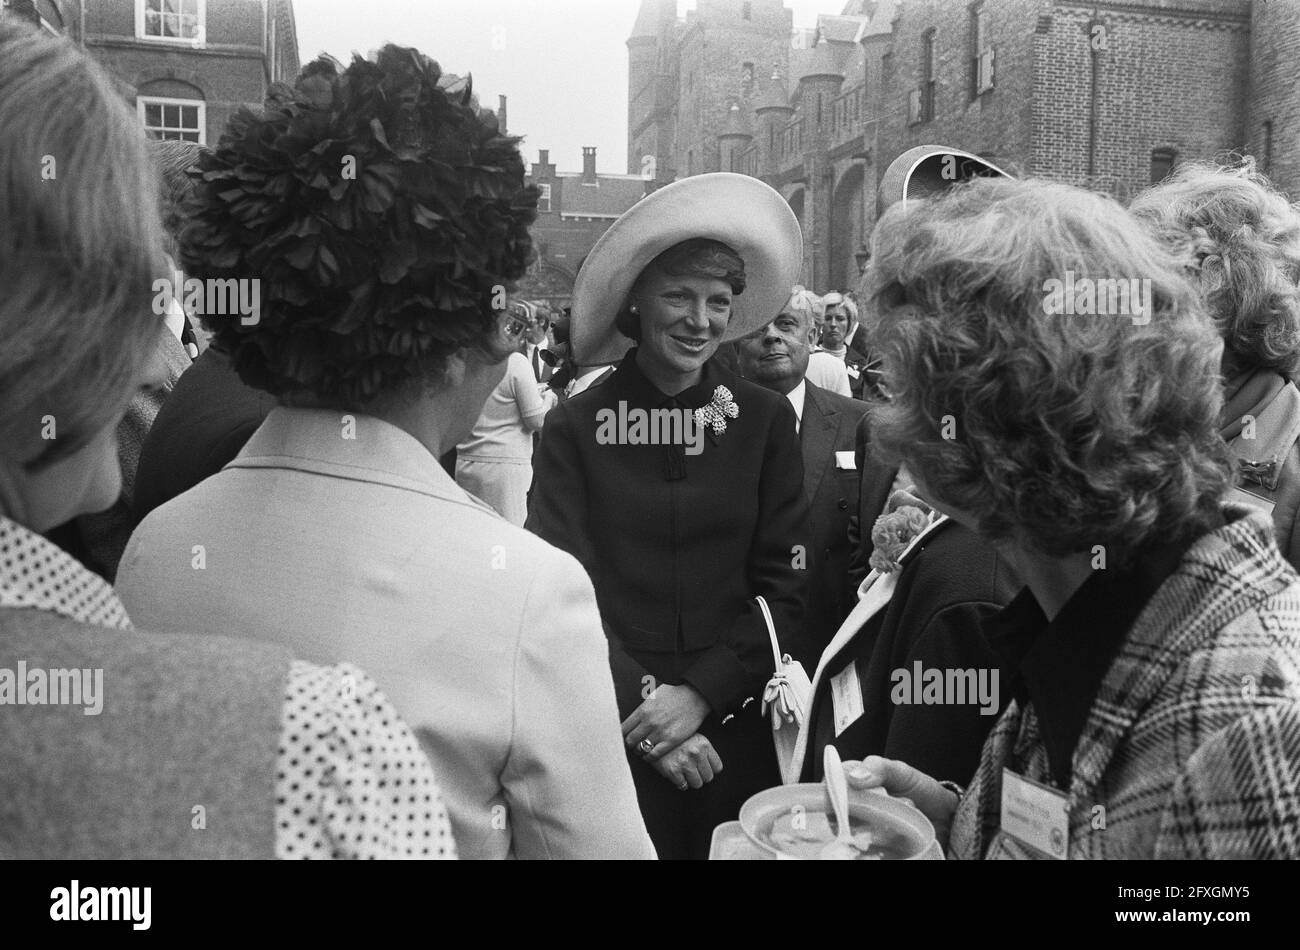 Celebration of Queen Juliana's Silver Jubilee in The Hague, Irene at coffee meal, September 6, 1973, Celebrations, anniversaries, queens, princesses, The Netherlands, 20th century press agency photo, news to remember, documentary, historic photography 1945-1990, visual stories, human history of the Twentieth Century, capturing moments in time Stock Photo